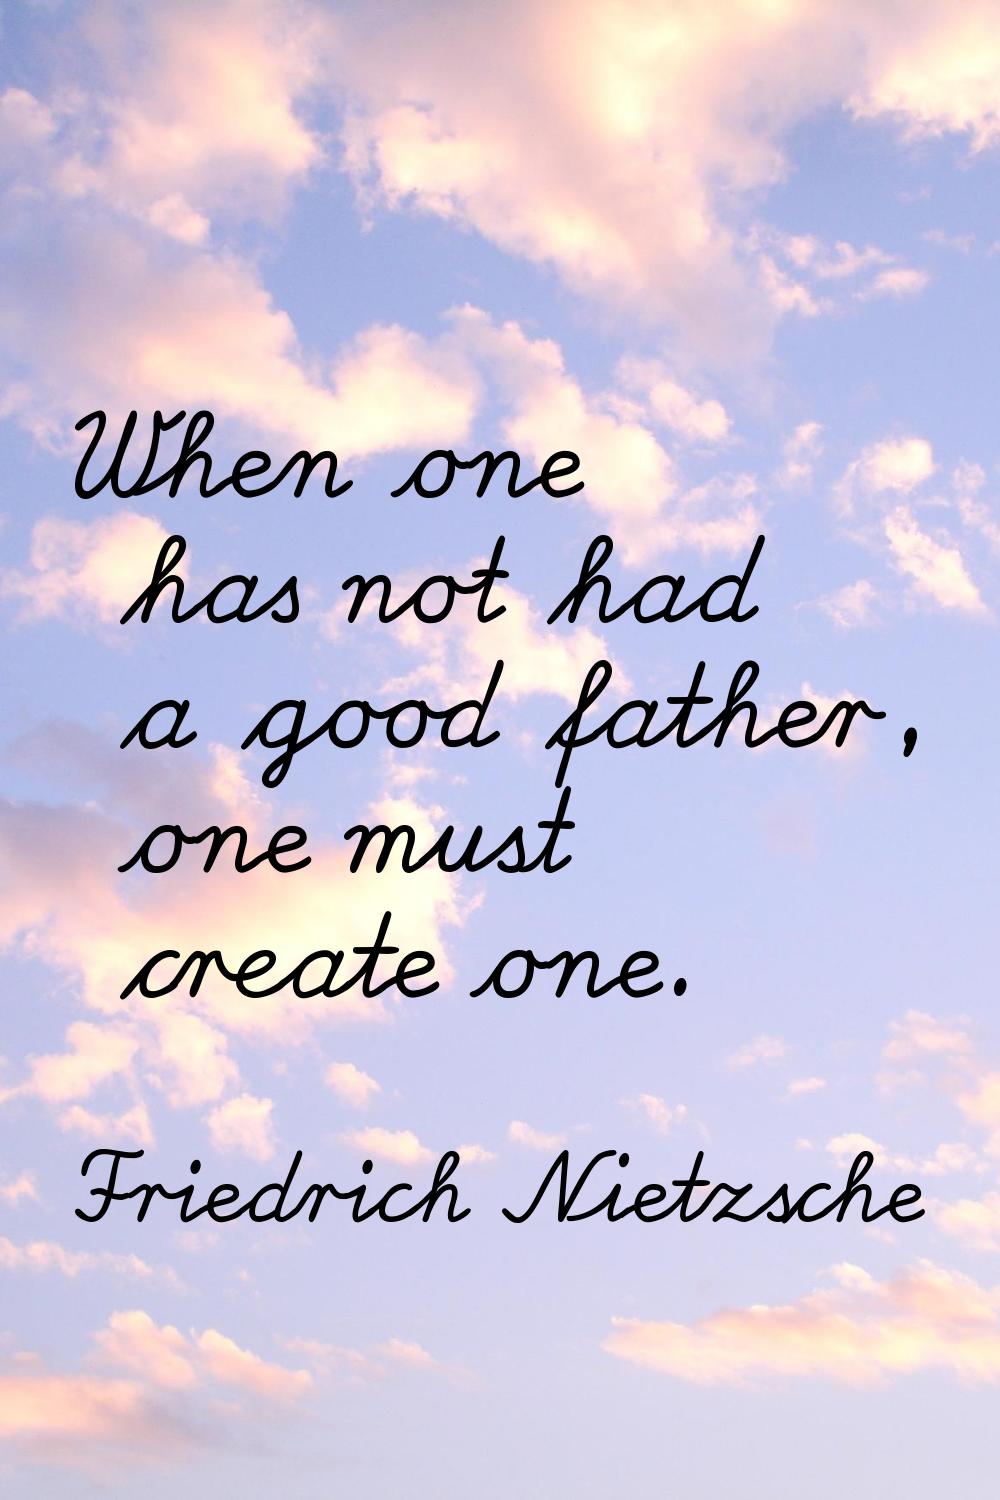 When one has not had a good father, one must create one.